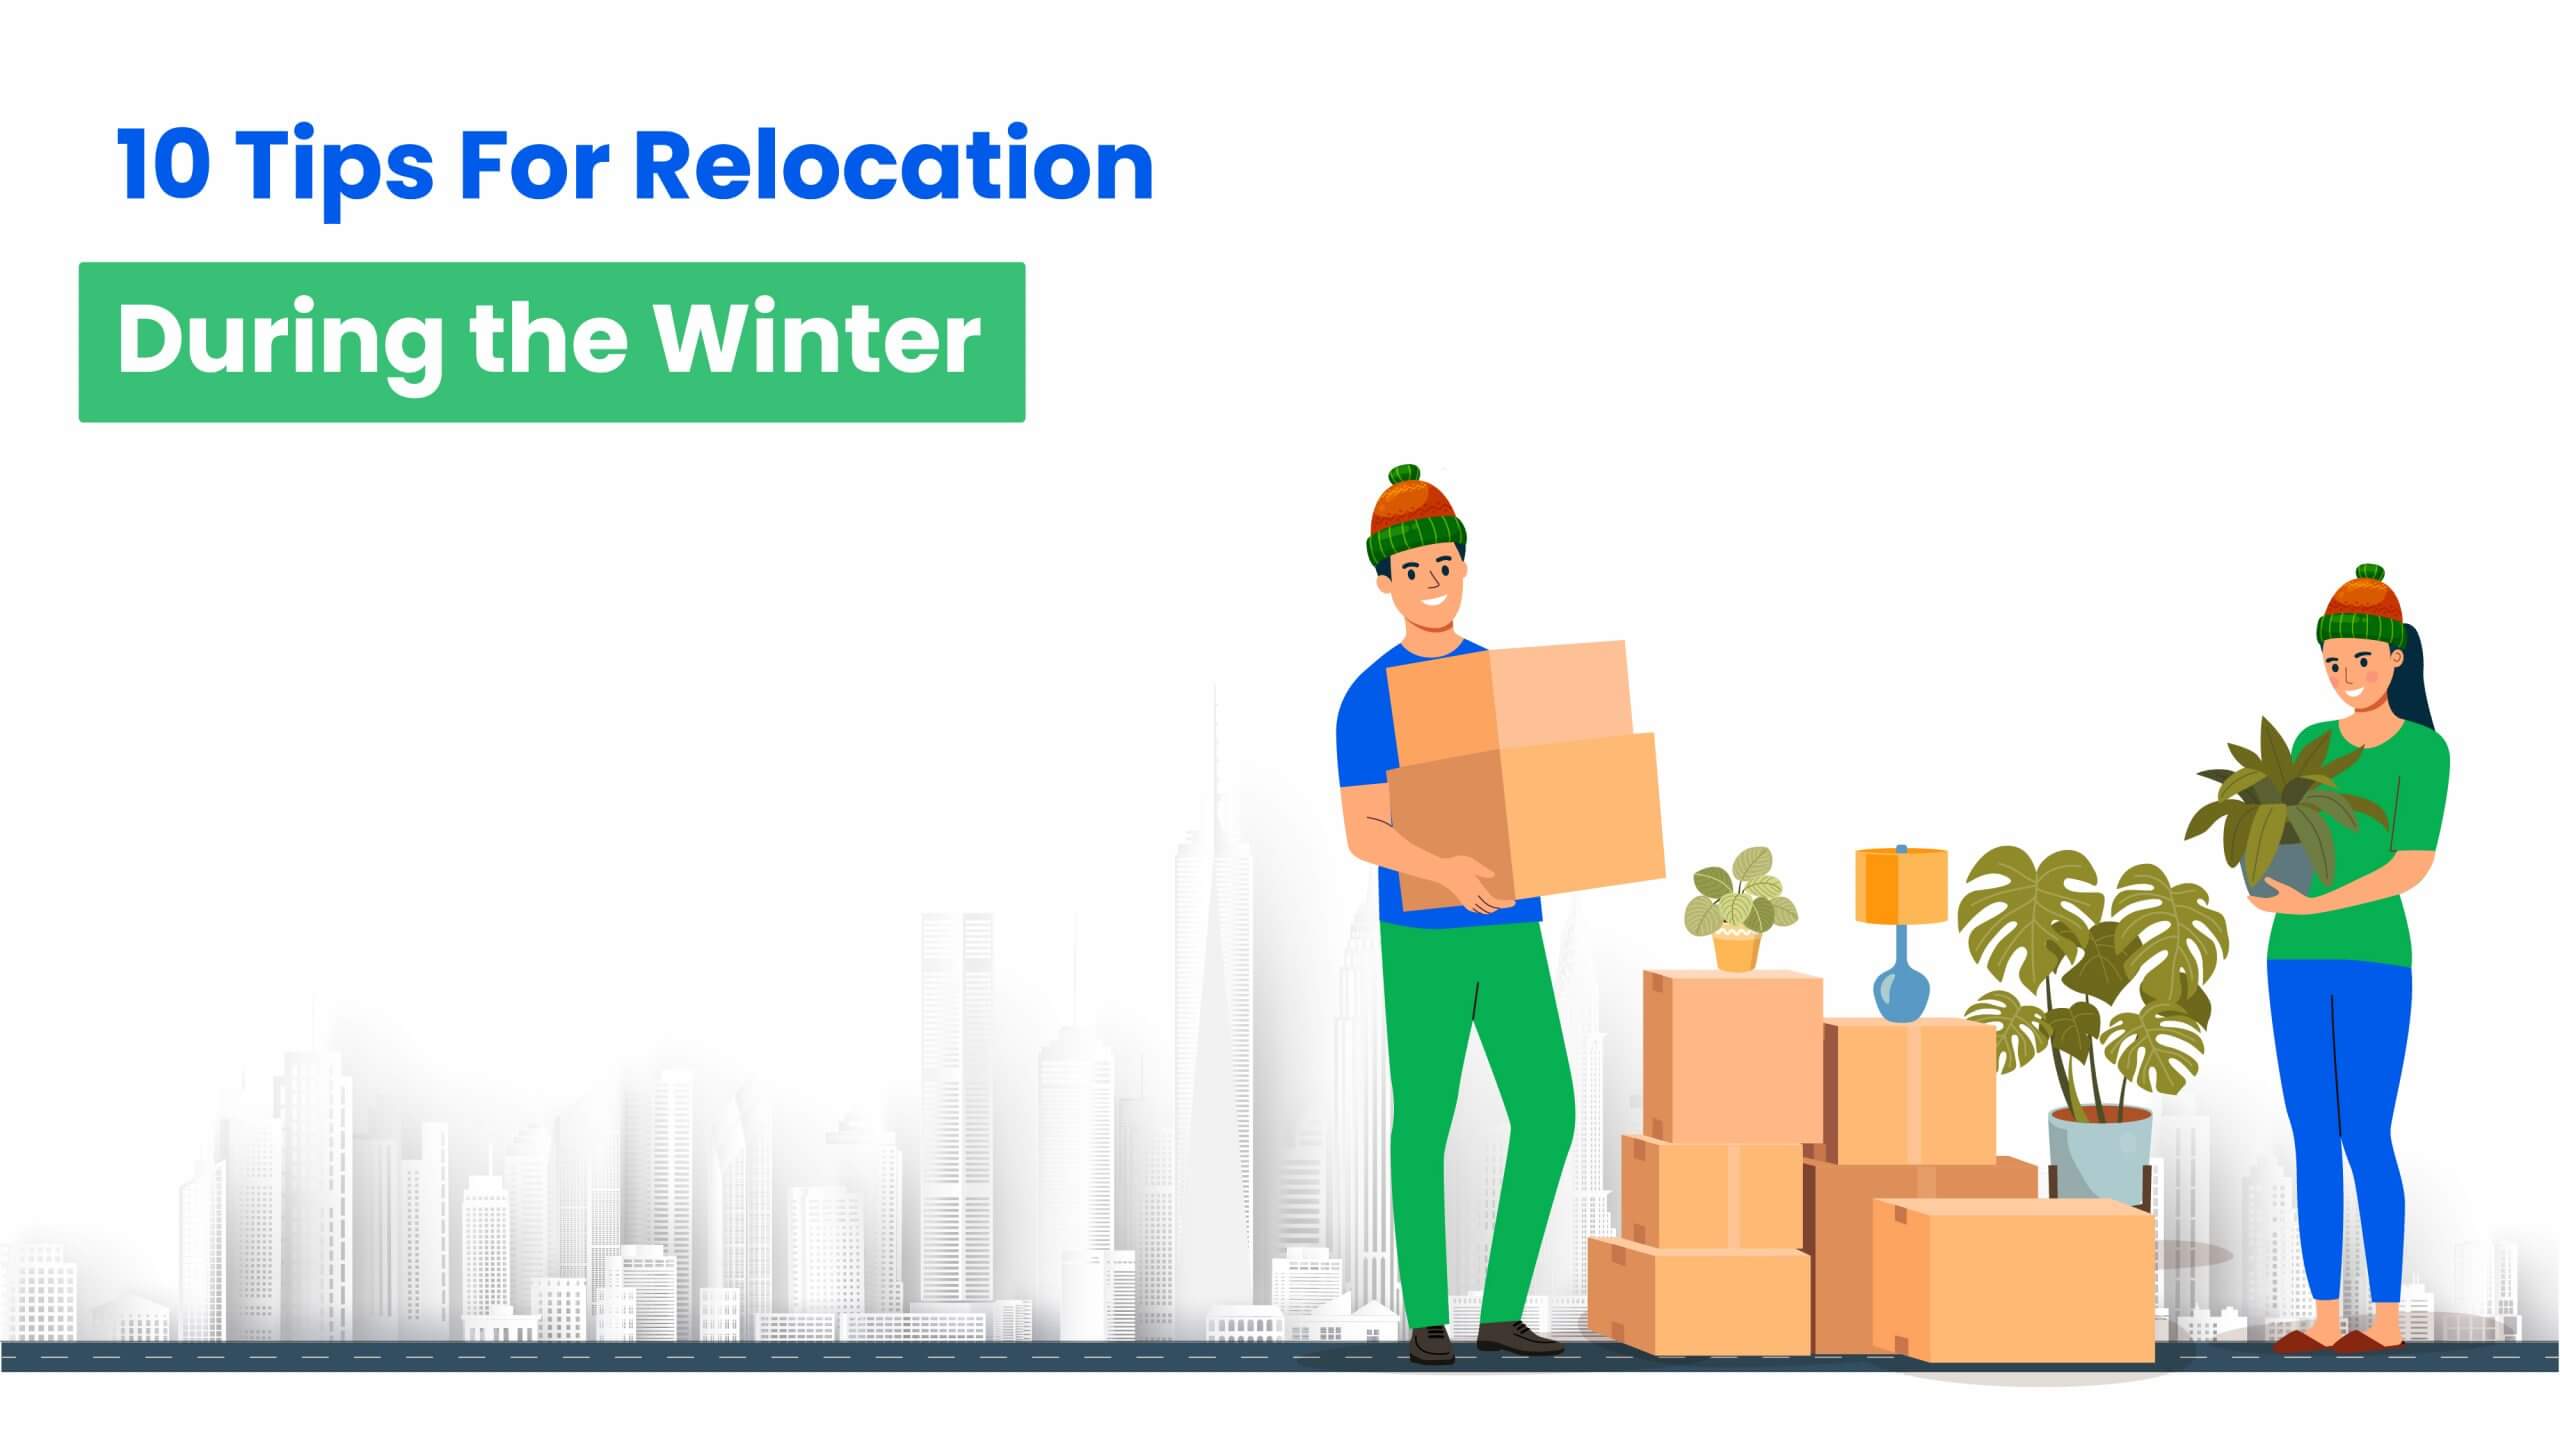 10 Tips For Relocation During the Winter 01